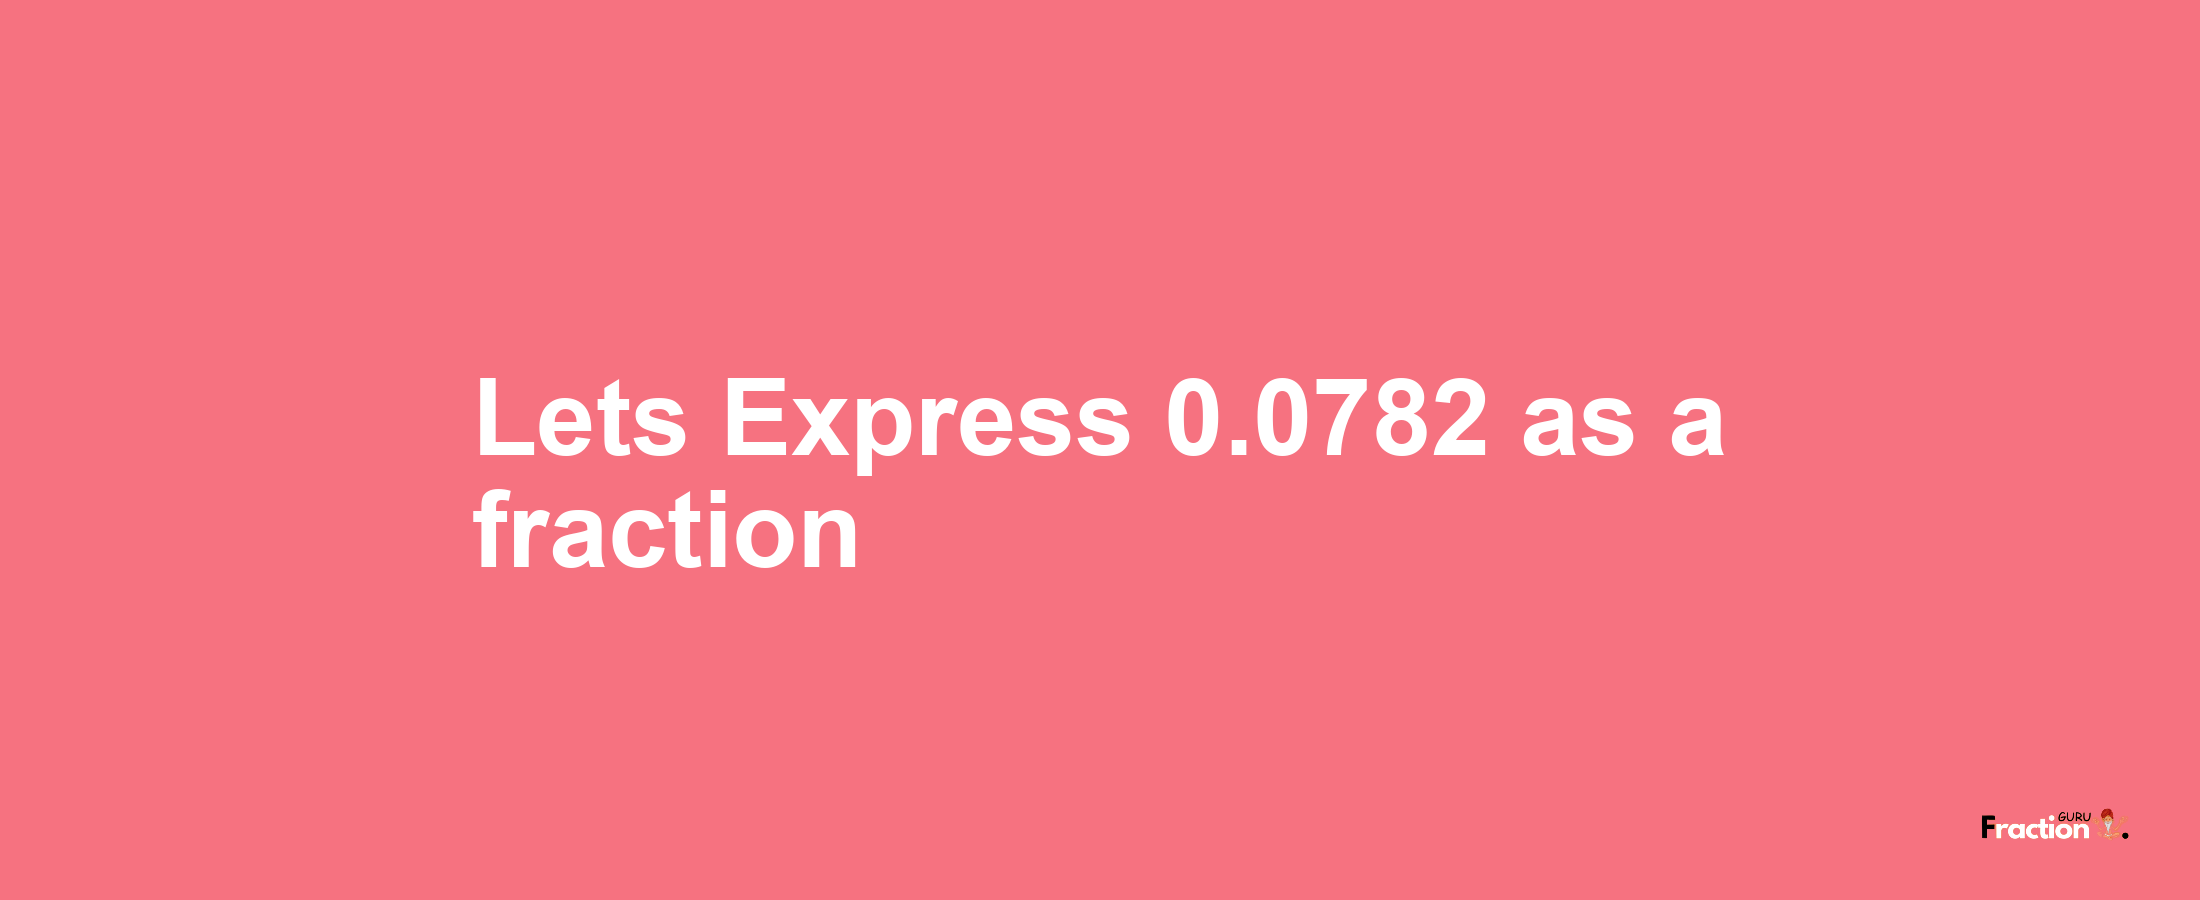 Lets Express 0.0782 as afraction